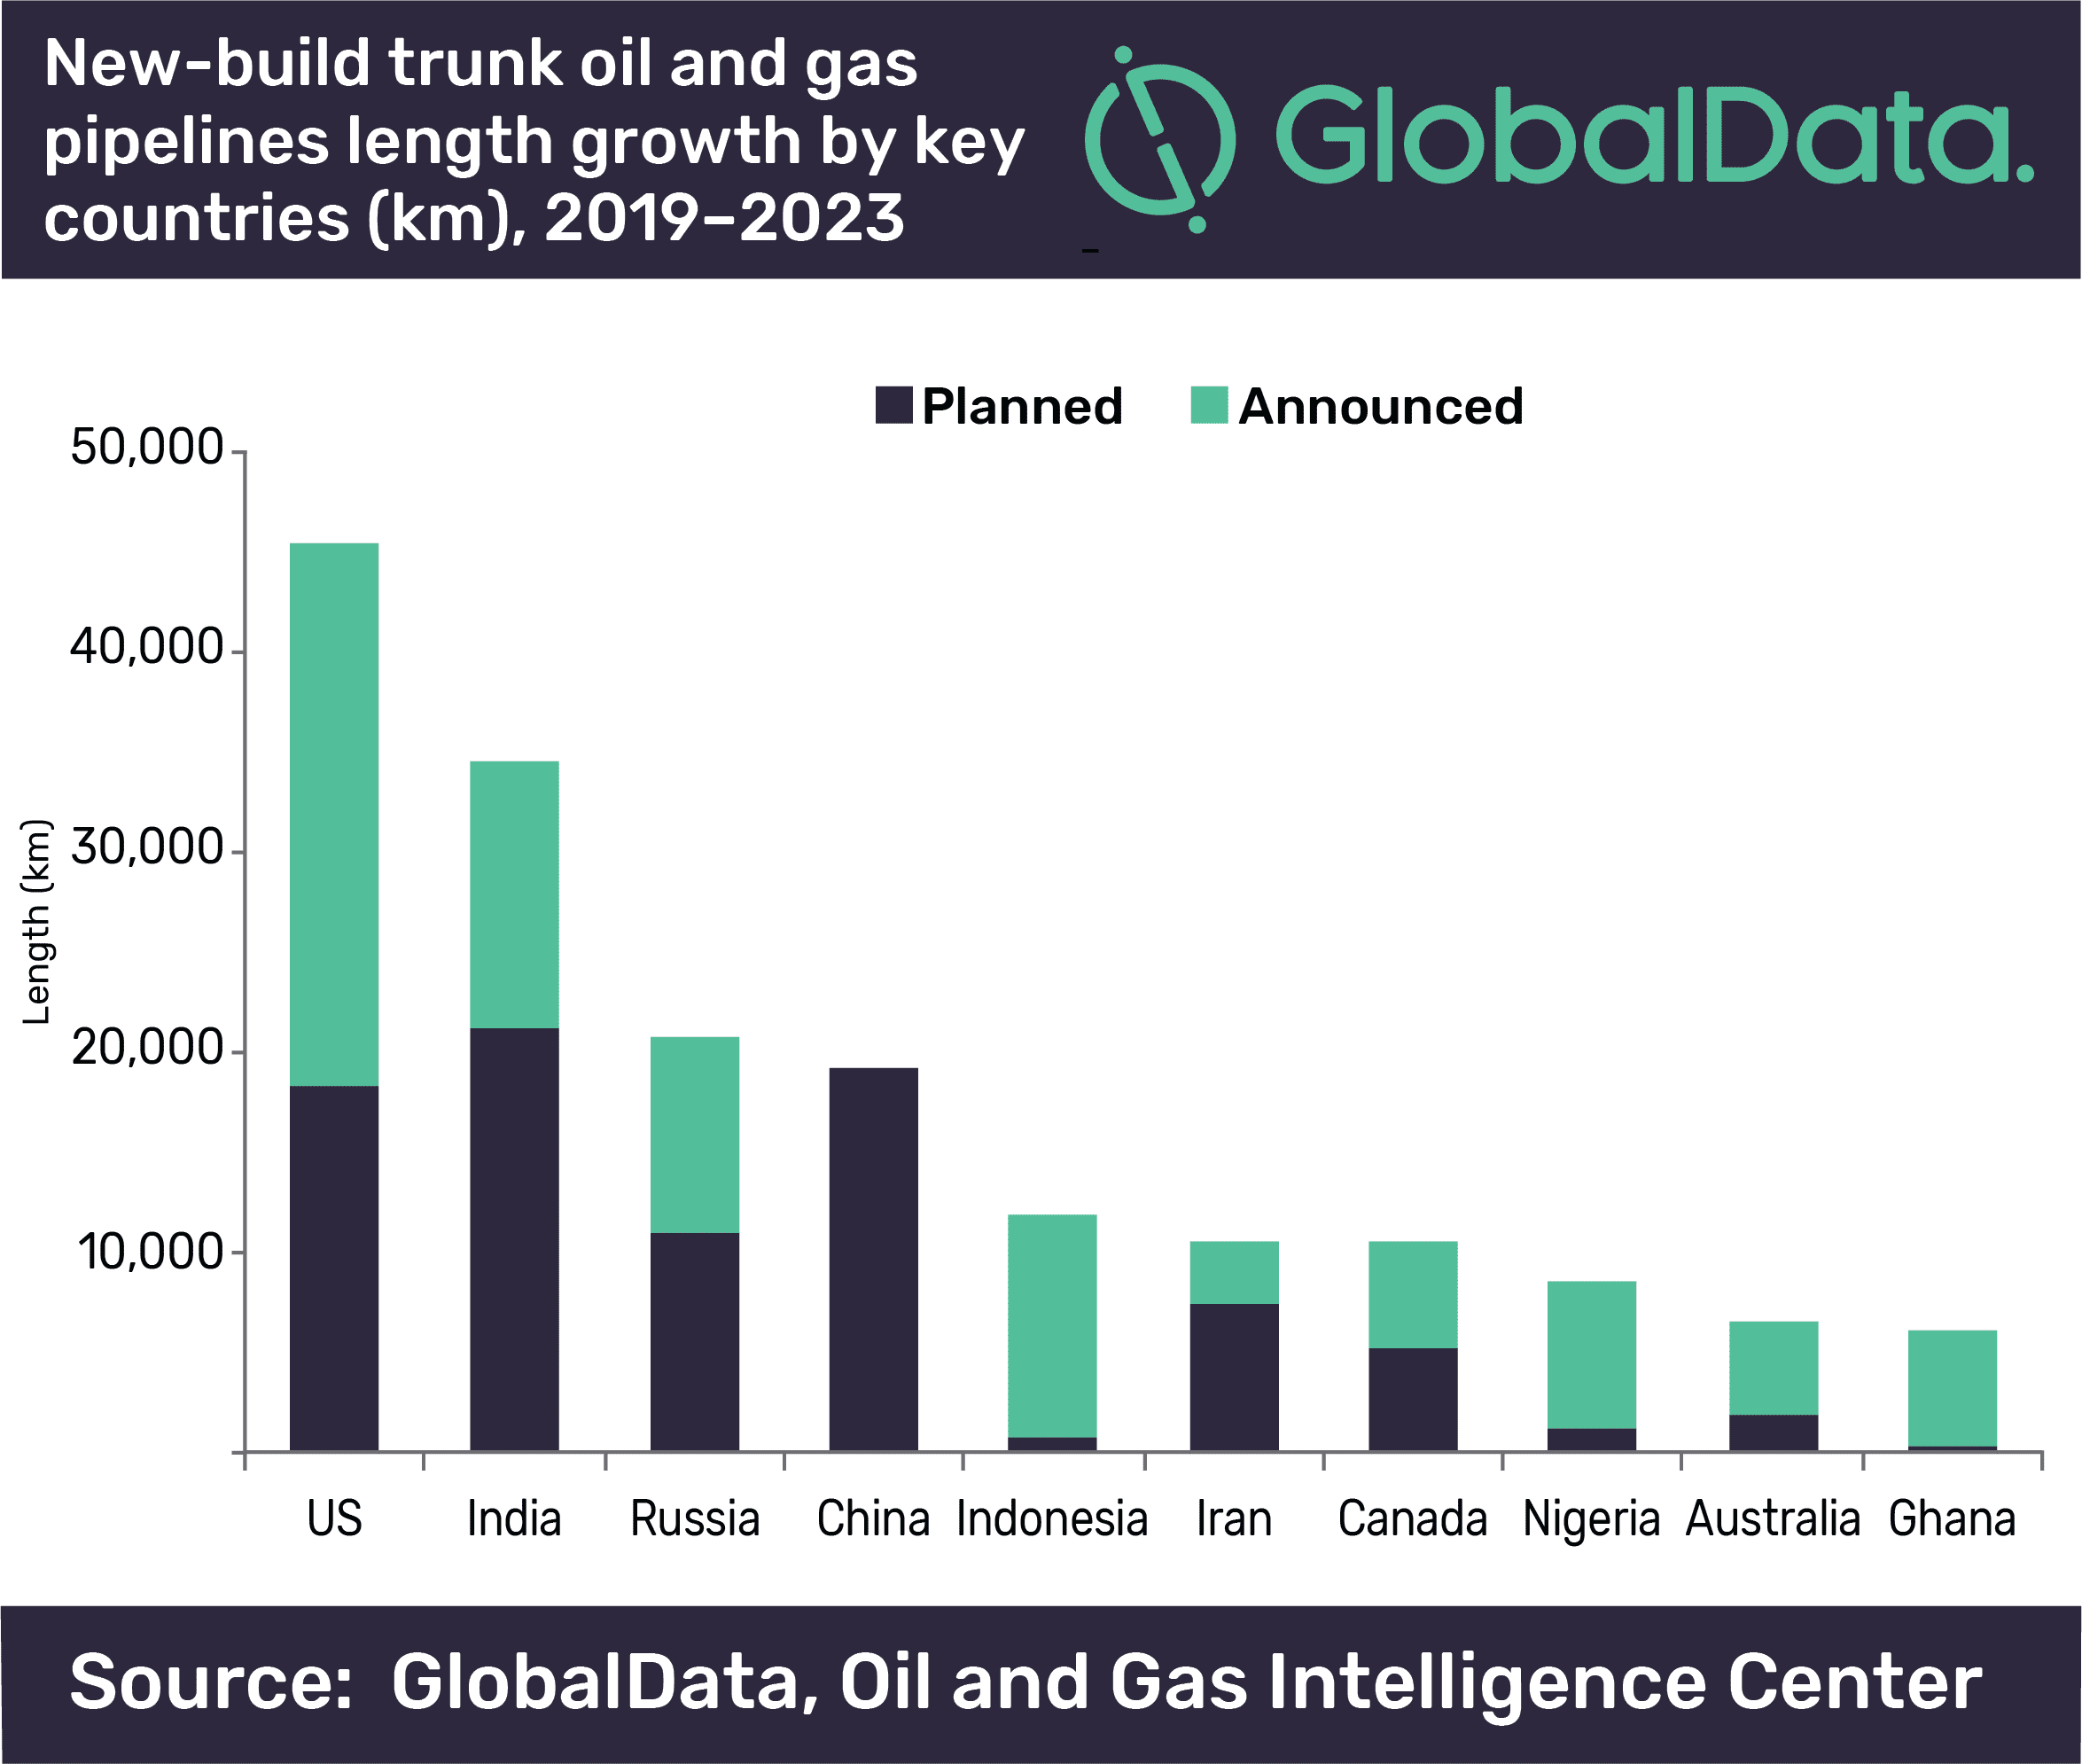 US leads globally on new-build trunk oil and gas pipeline additions by 2023